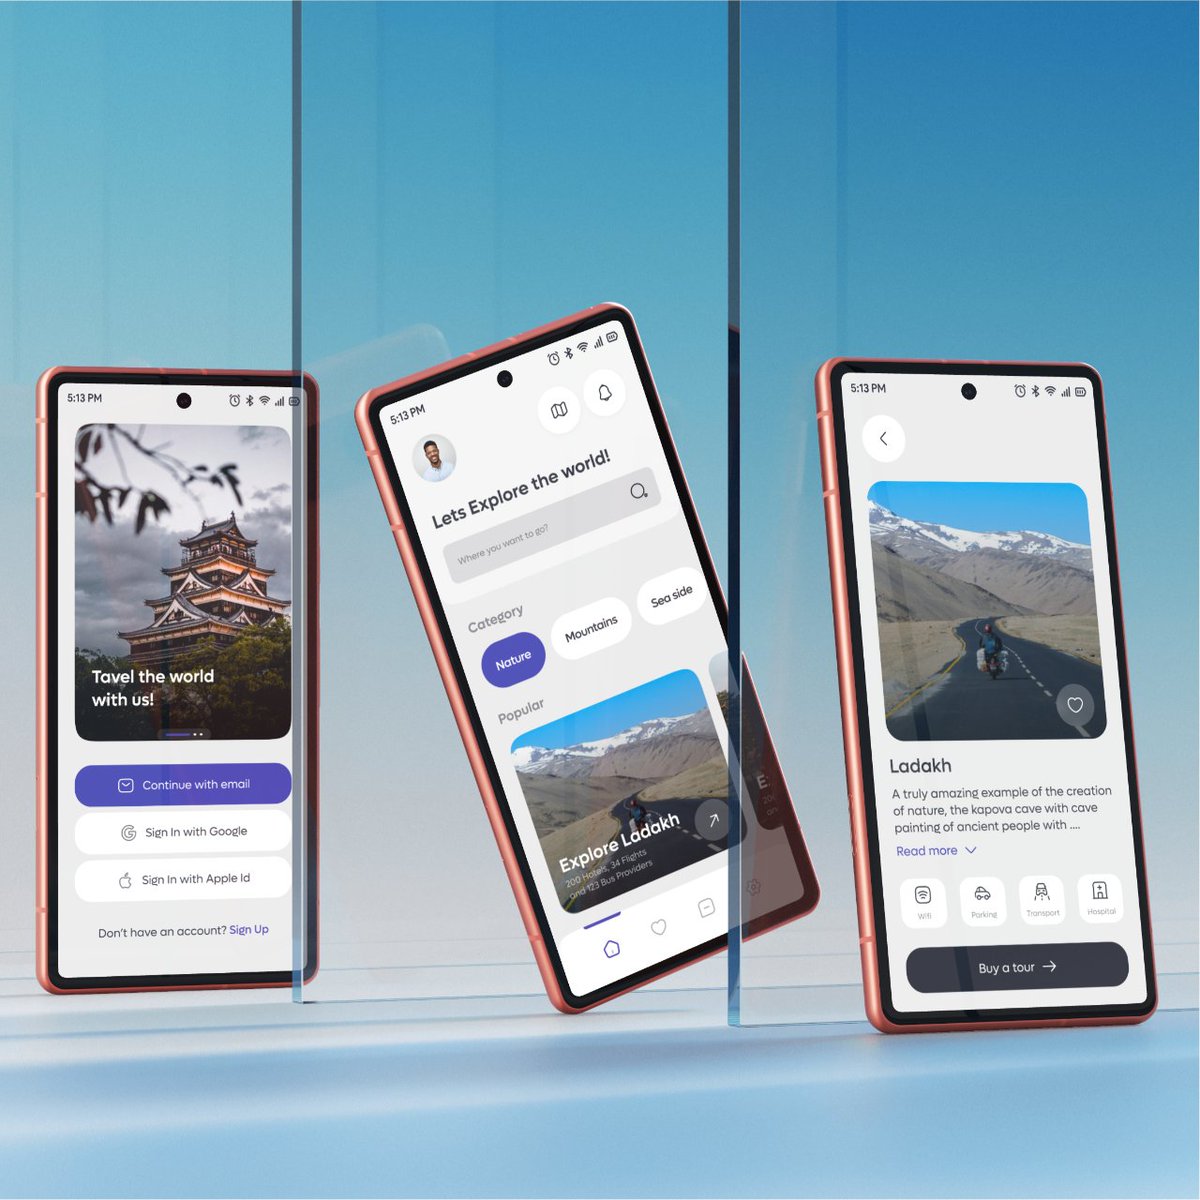 Globetrotter's Guide: Explore the World! Part 2 - Embark on a journey around the globe with our exciting travel app.
dribbble.com/domingo
#MountainAdventures #TravelApp #HikingTrips #OutdoorExploration #MountainCalls #AdventureAwaits #PeakExperiences